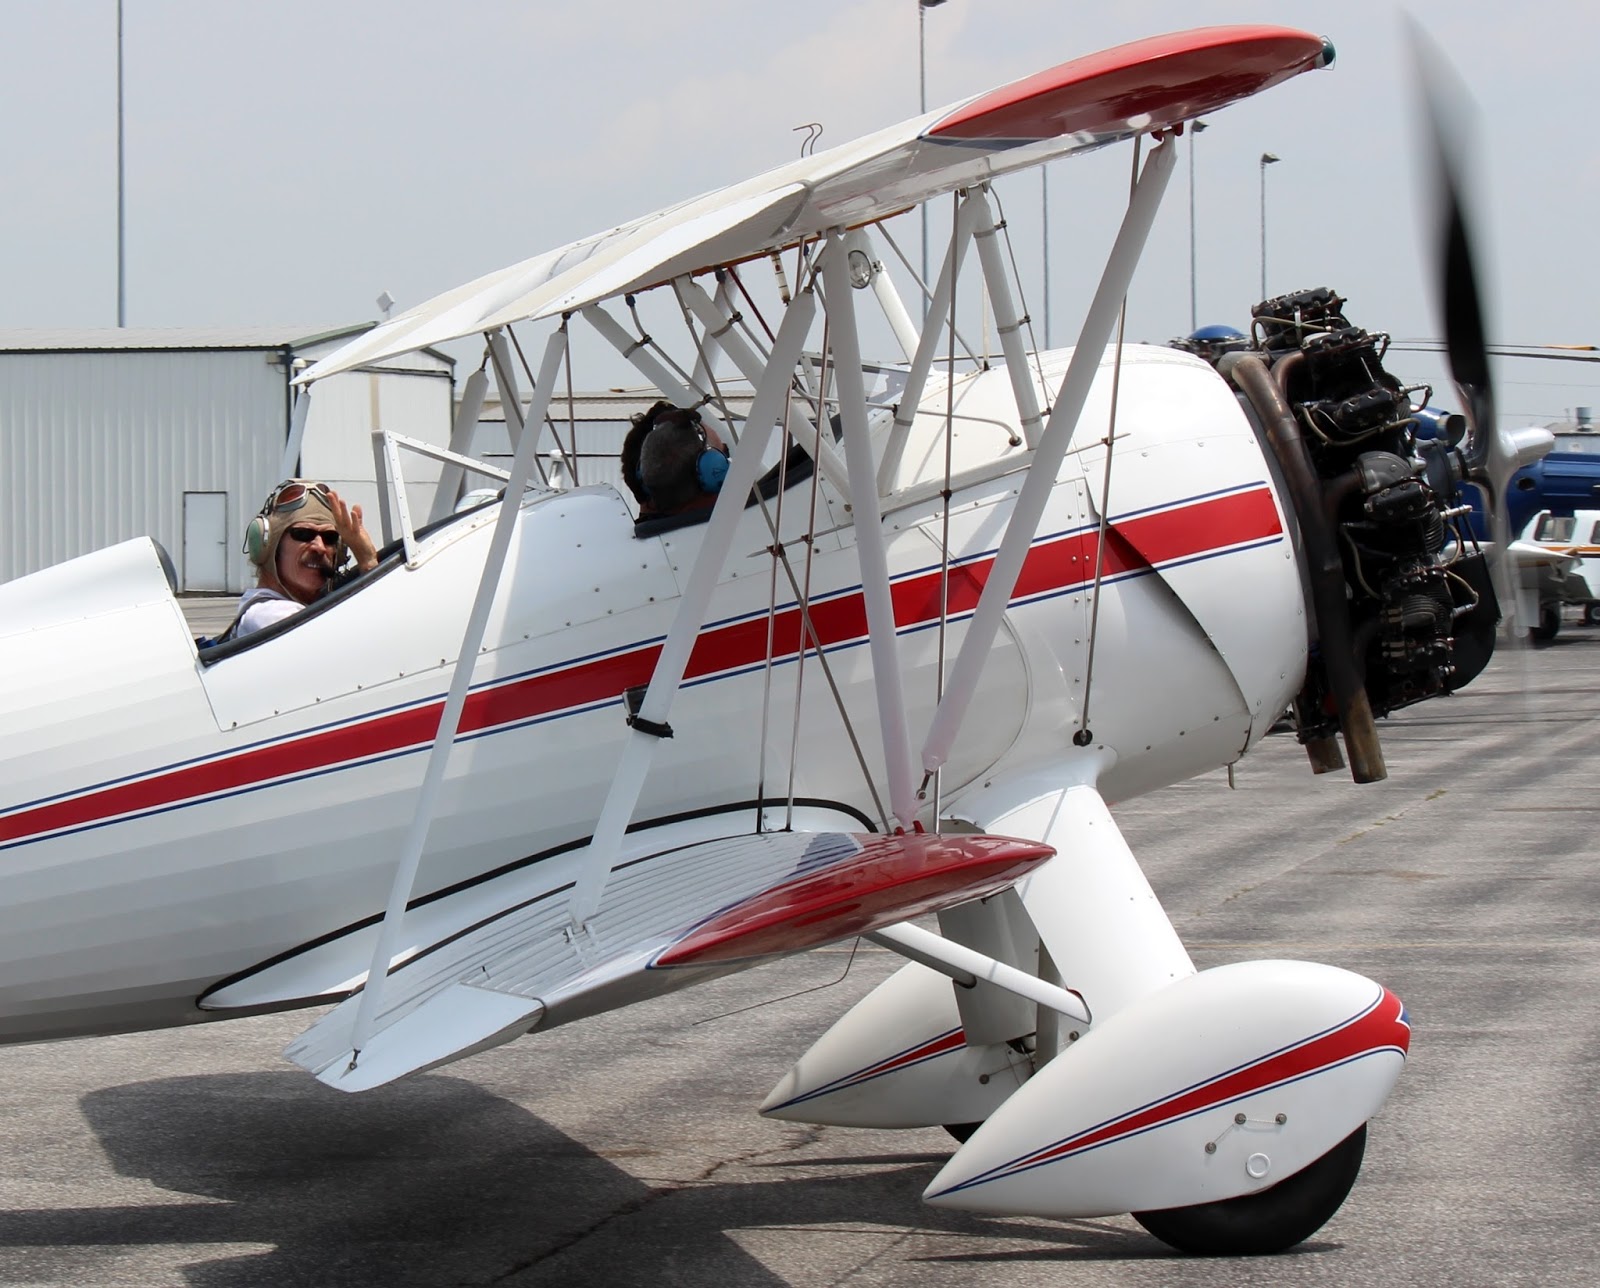 The Aero Experience: St. Louis Biplane Rides Now Offering Waco Flights Over St. Louis Area